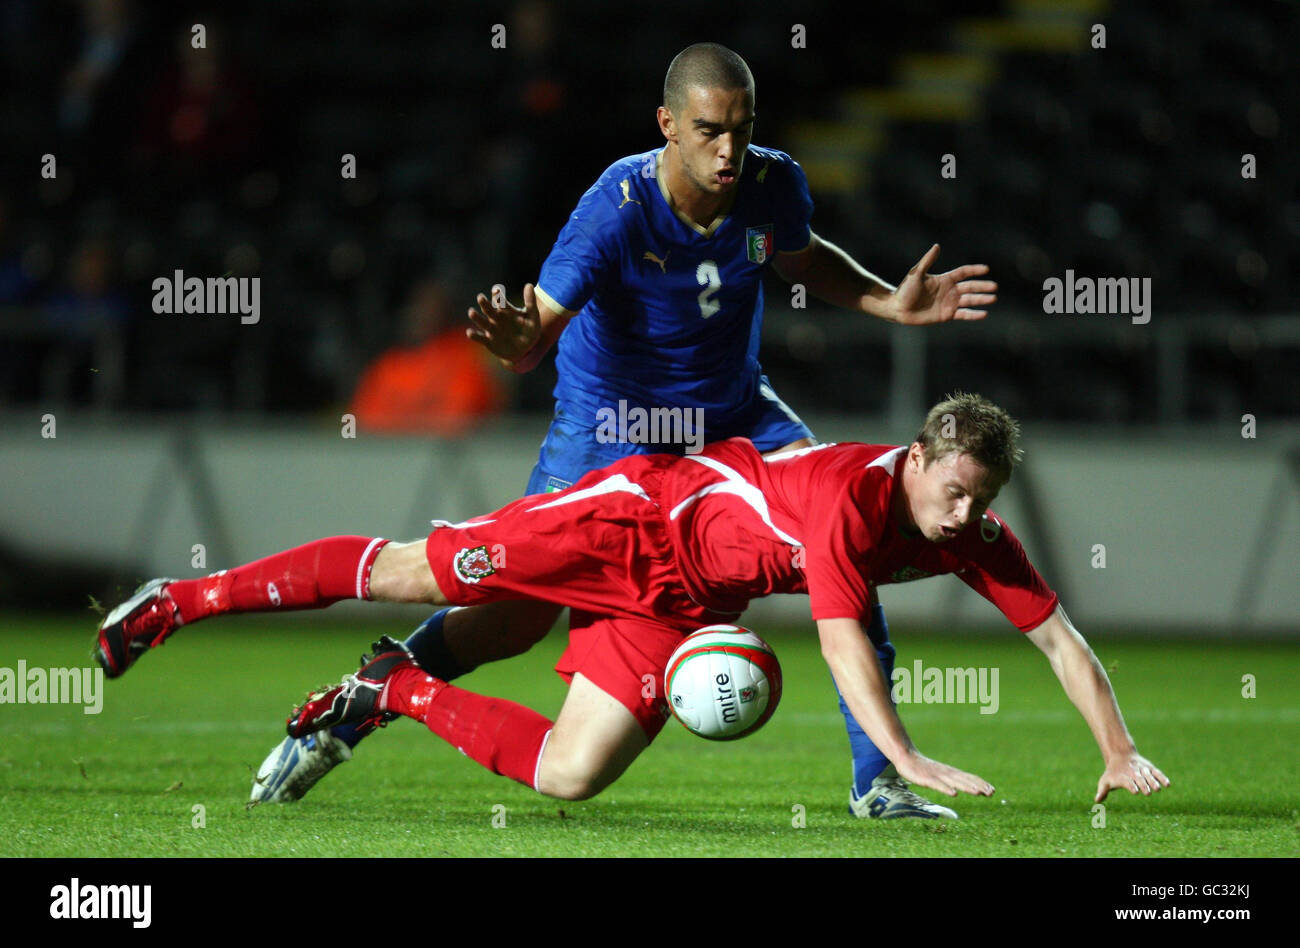 Wales' Simon Church (floor) goes down under the challenge of Italy's Giuseppe Bellusci during the UEFA Under 21 Qualifying match at the Liberty Stadium, Swansea . Stock Photo